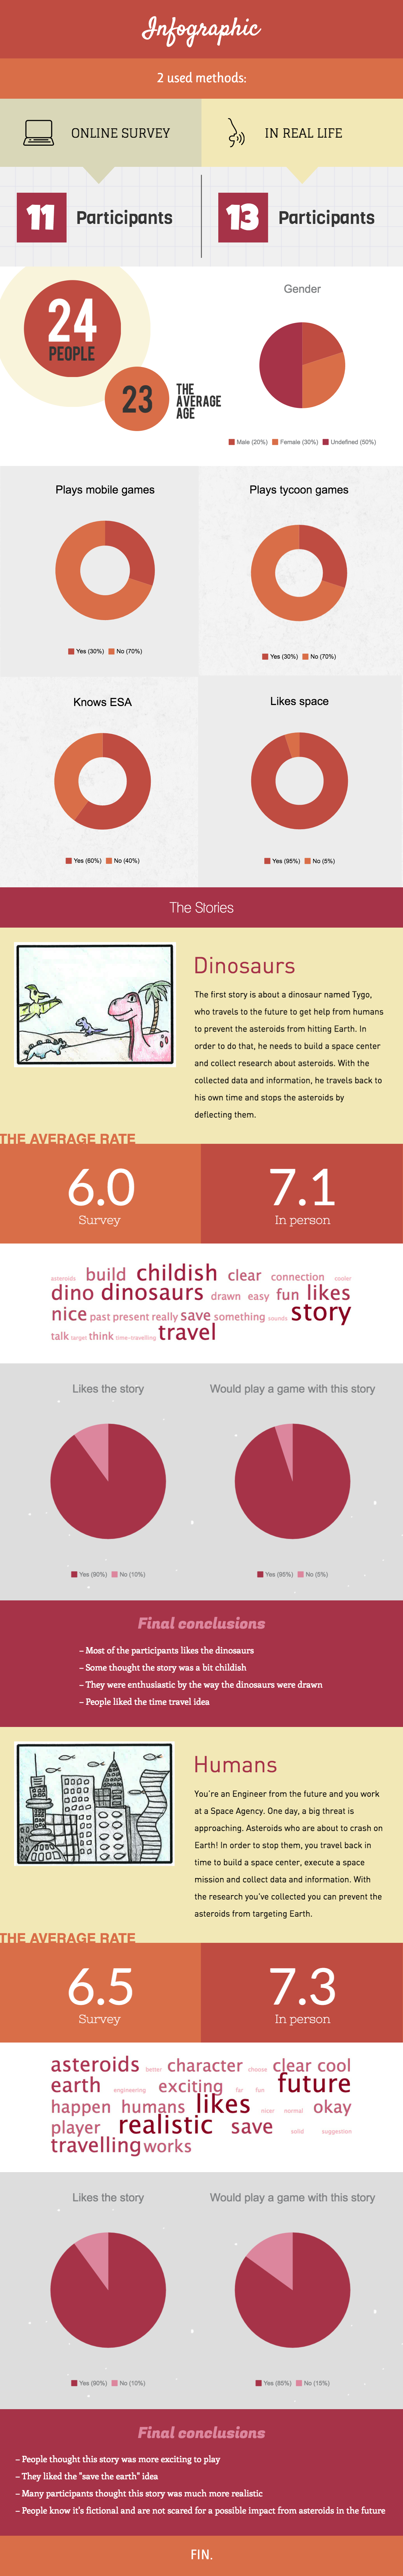 story-concepts-infographic